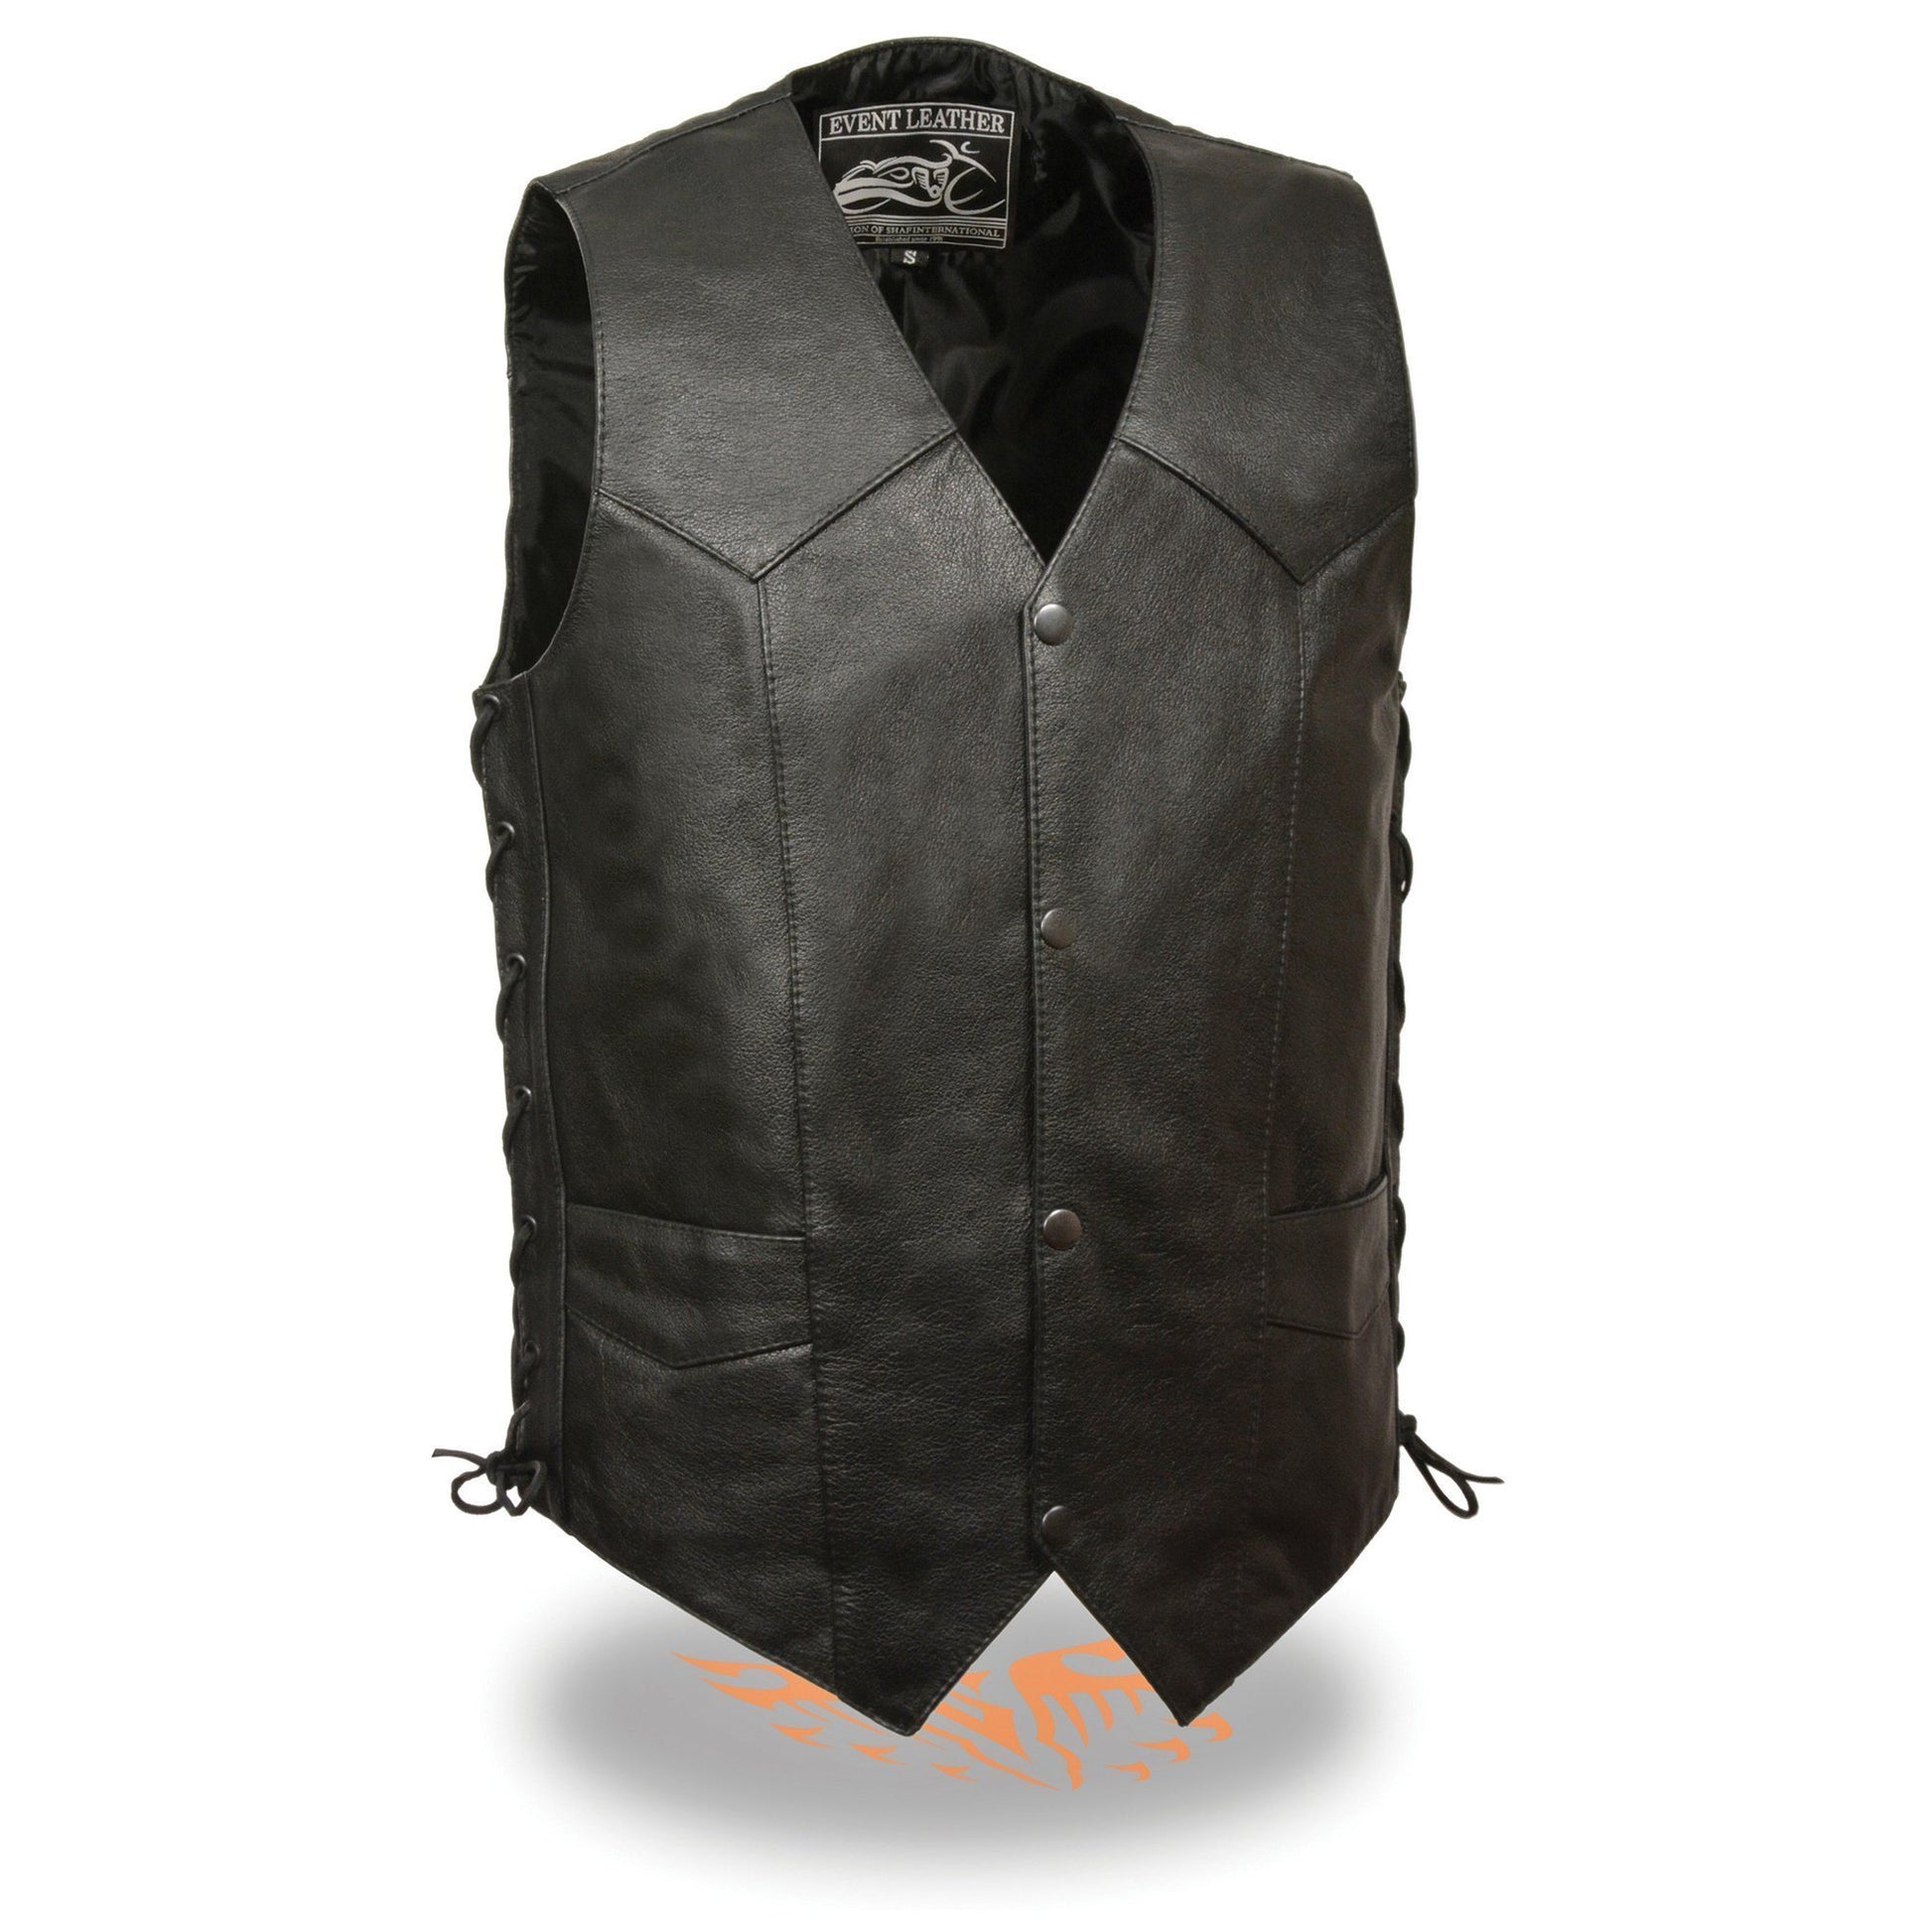 Event Leather EL5397 Black Motorcycle Leather Vest for Men w/ Side Lace- Riding Club Adult Motorcycle Vests